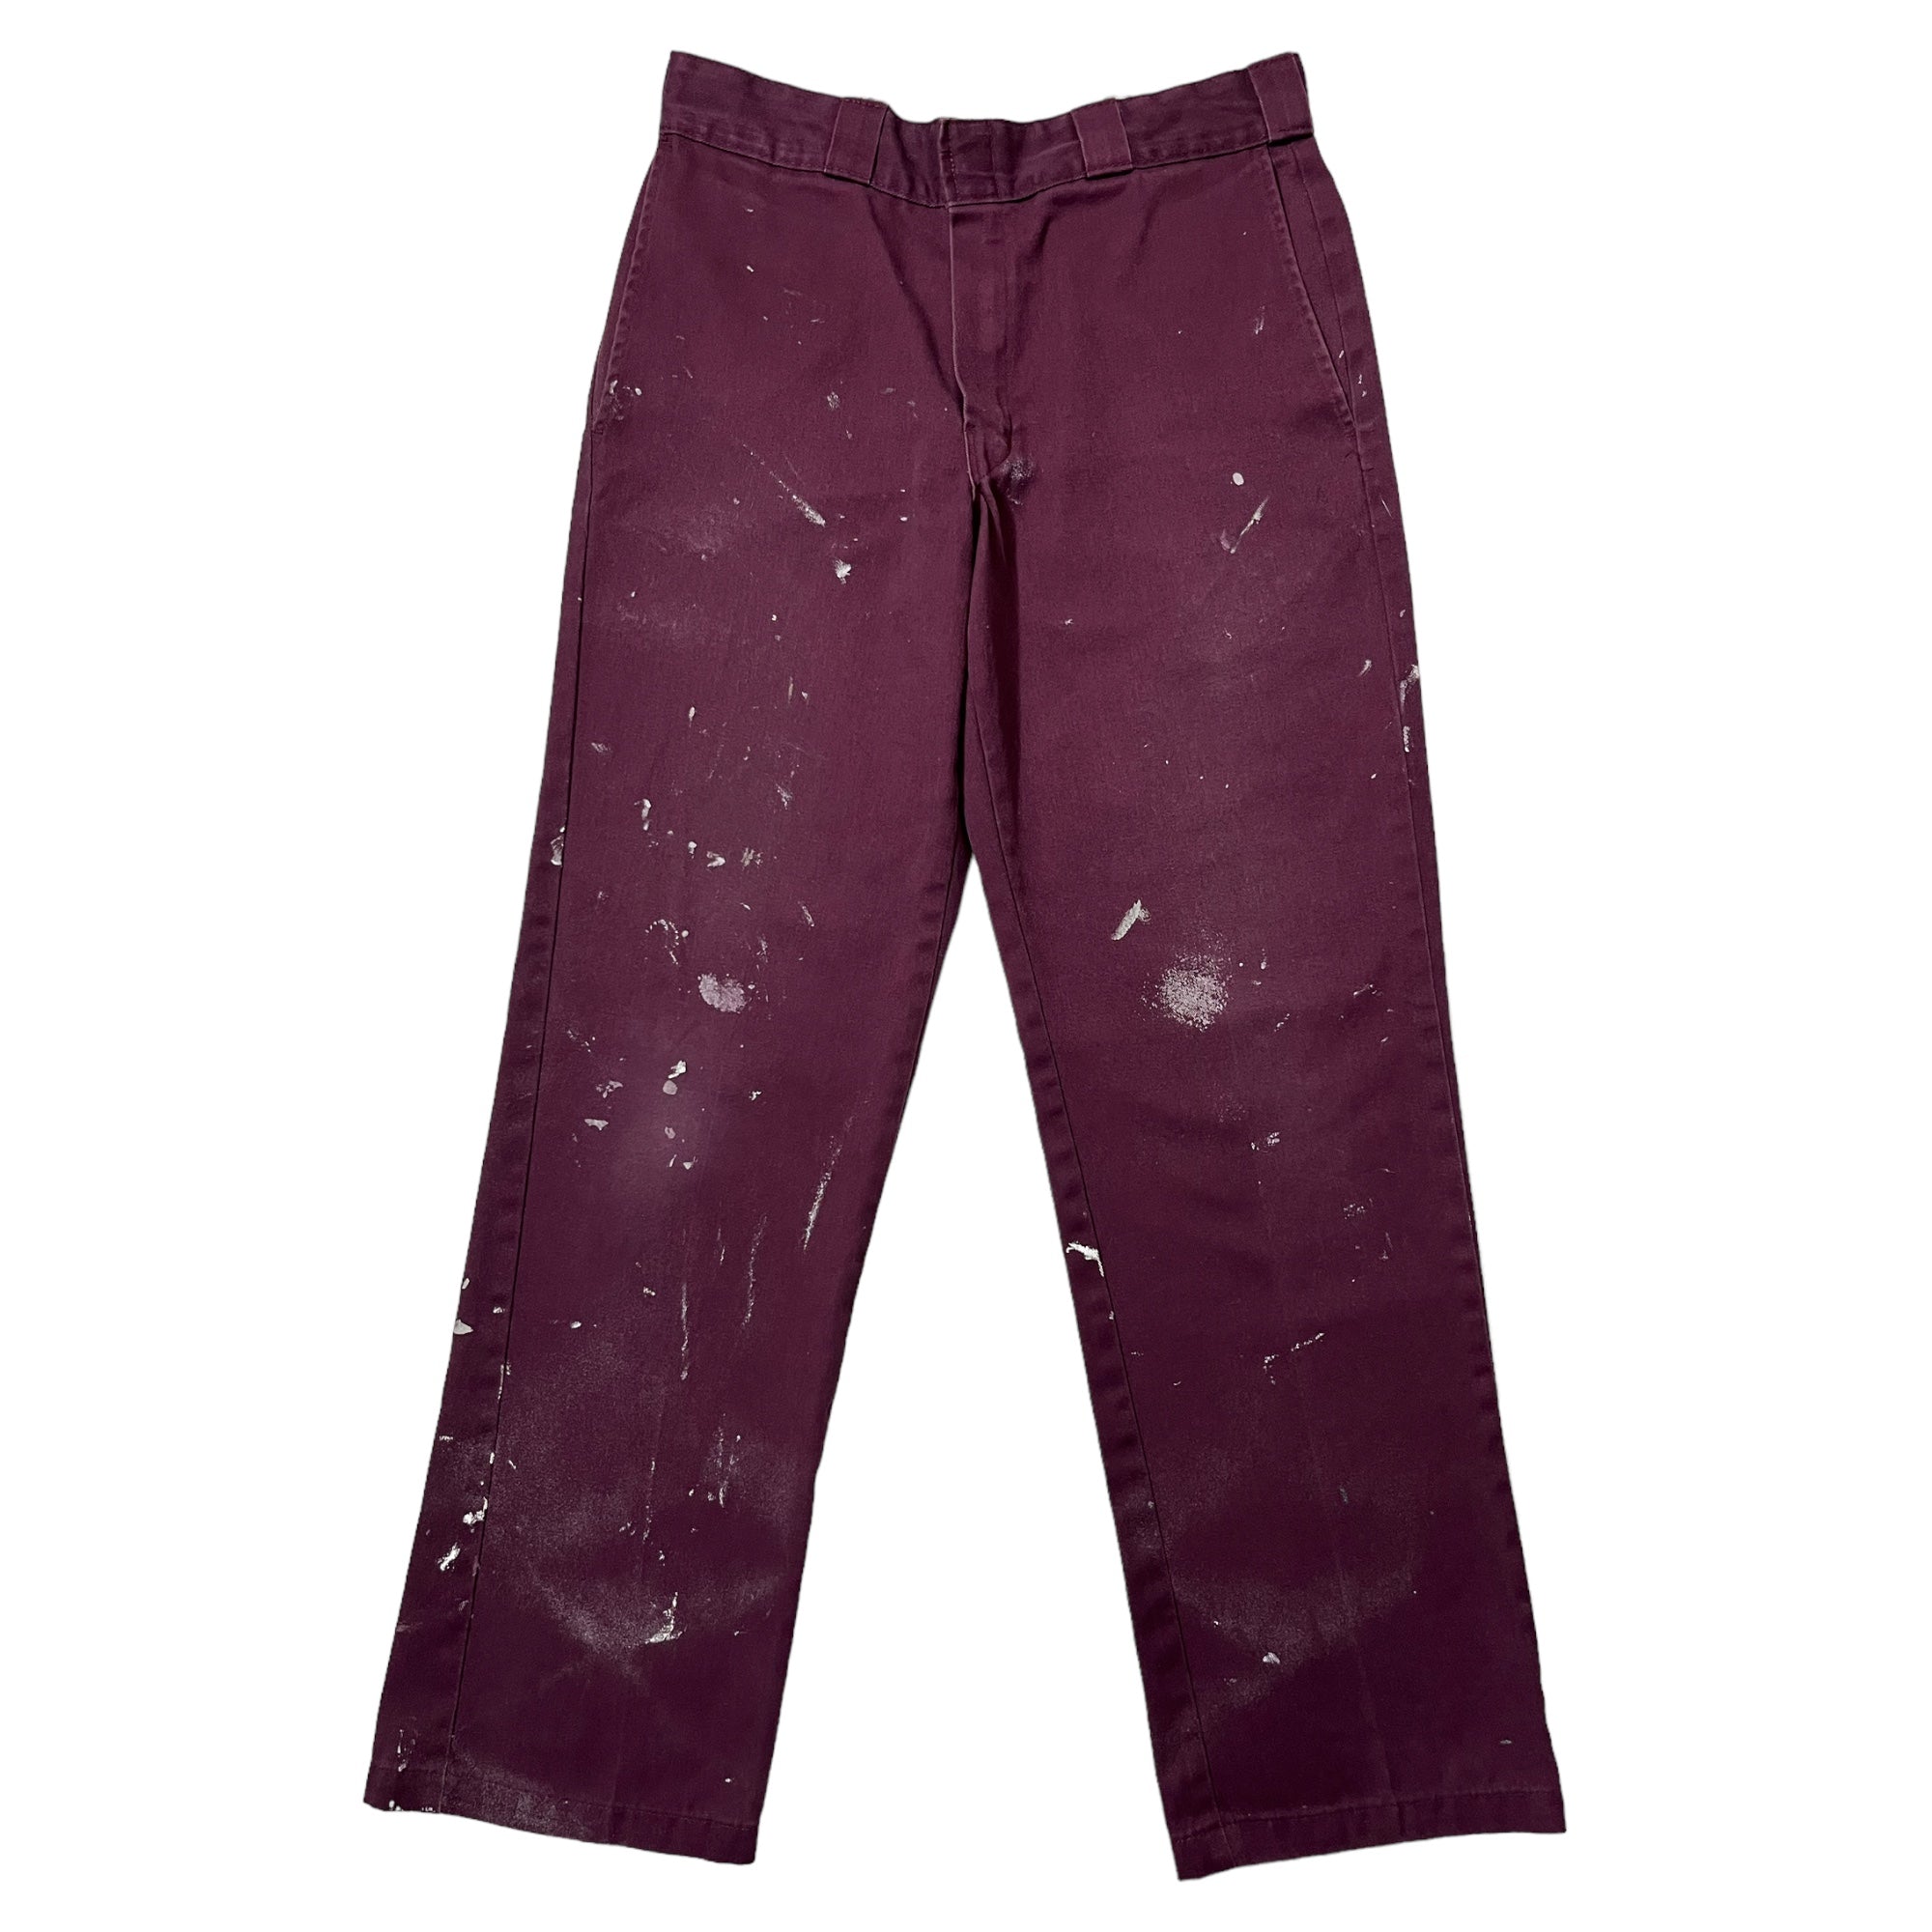 Late 90s Dickies 874 Work Trousers - Faded Bordeaux - 32x30